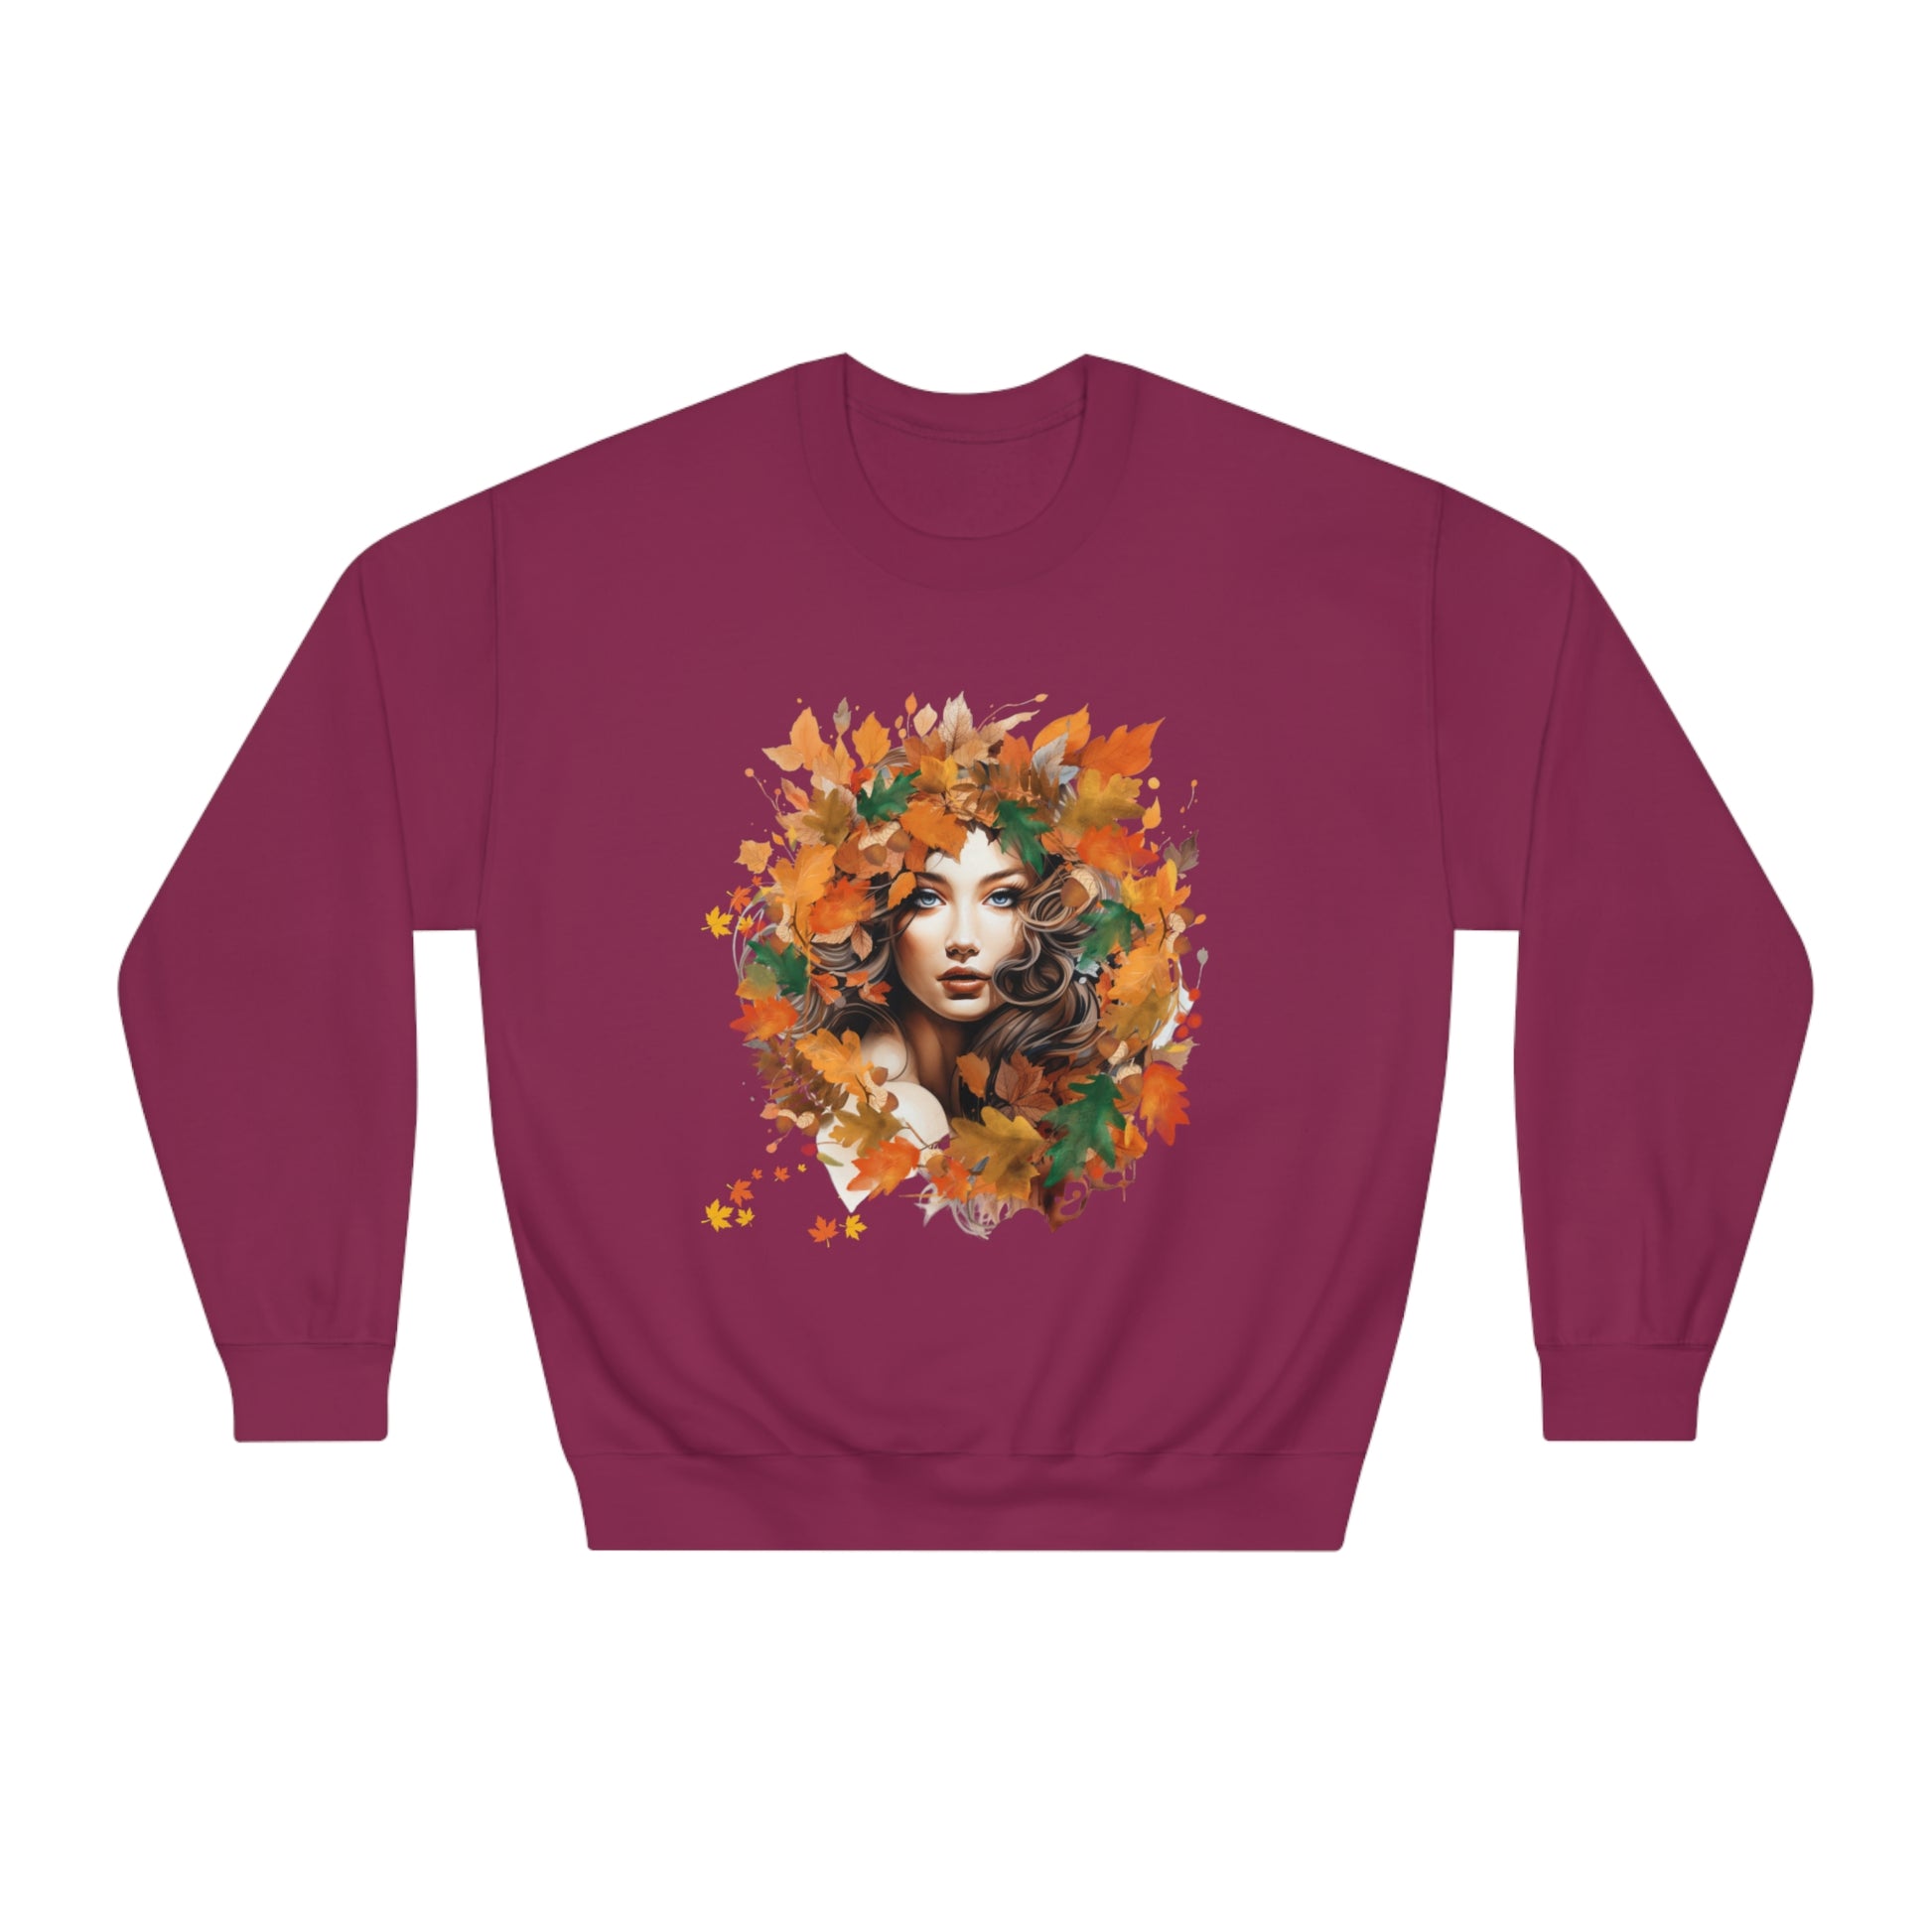 Whimsical Dreams in Autumn Hues: Romantic Dreamy Female Surrounded by Autumn Leaves Sweatshirt - Fairycore, Forestcore, Cottagecore-inspired Fashion Sweatshirt Maroon S 